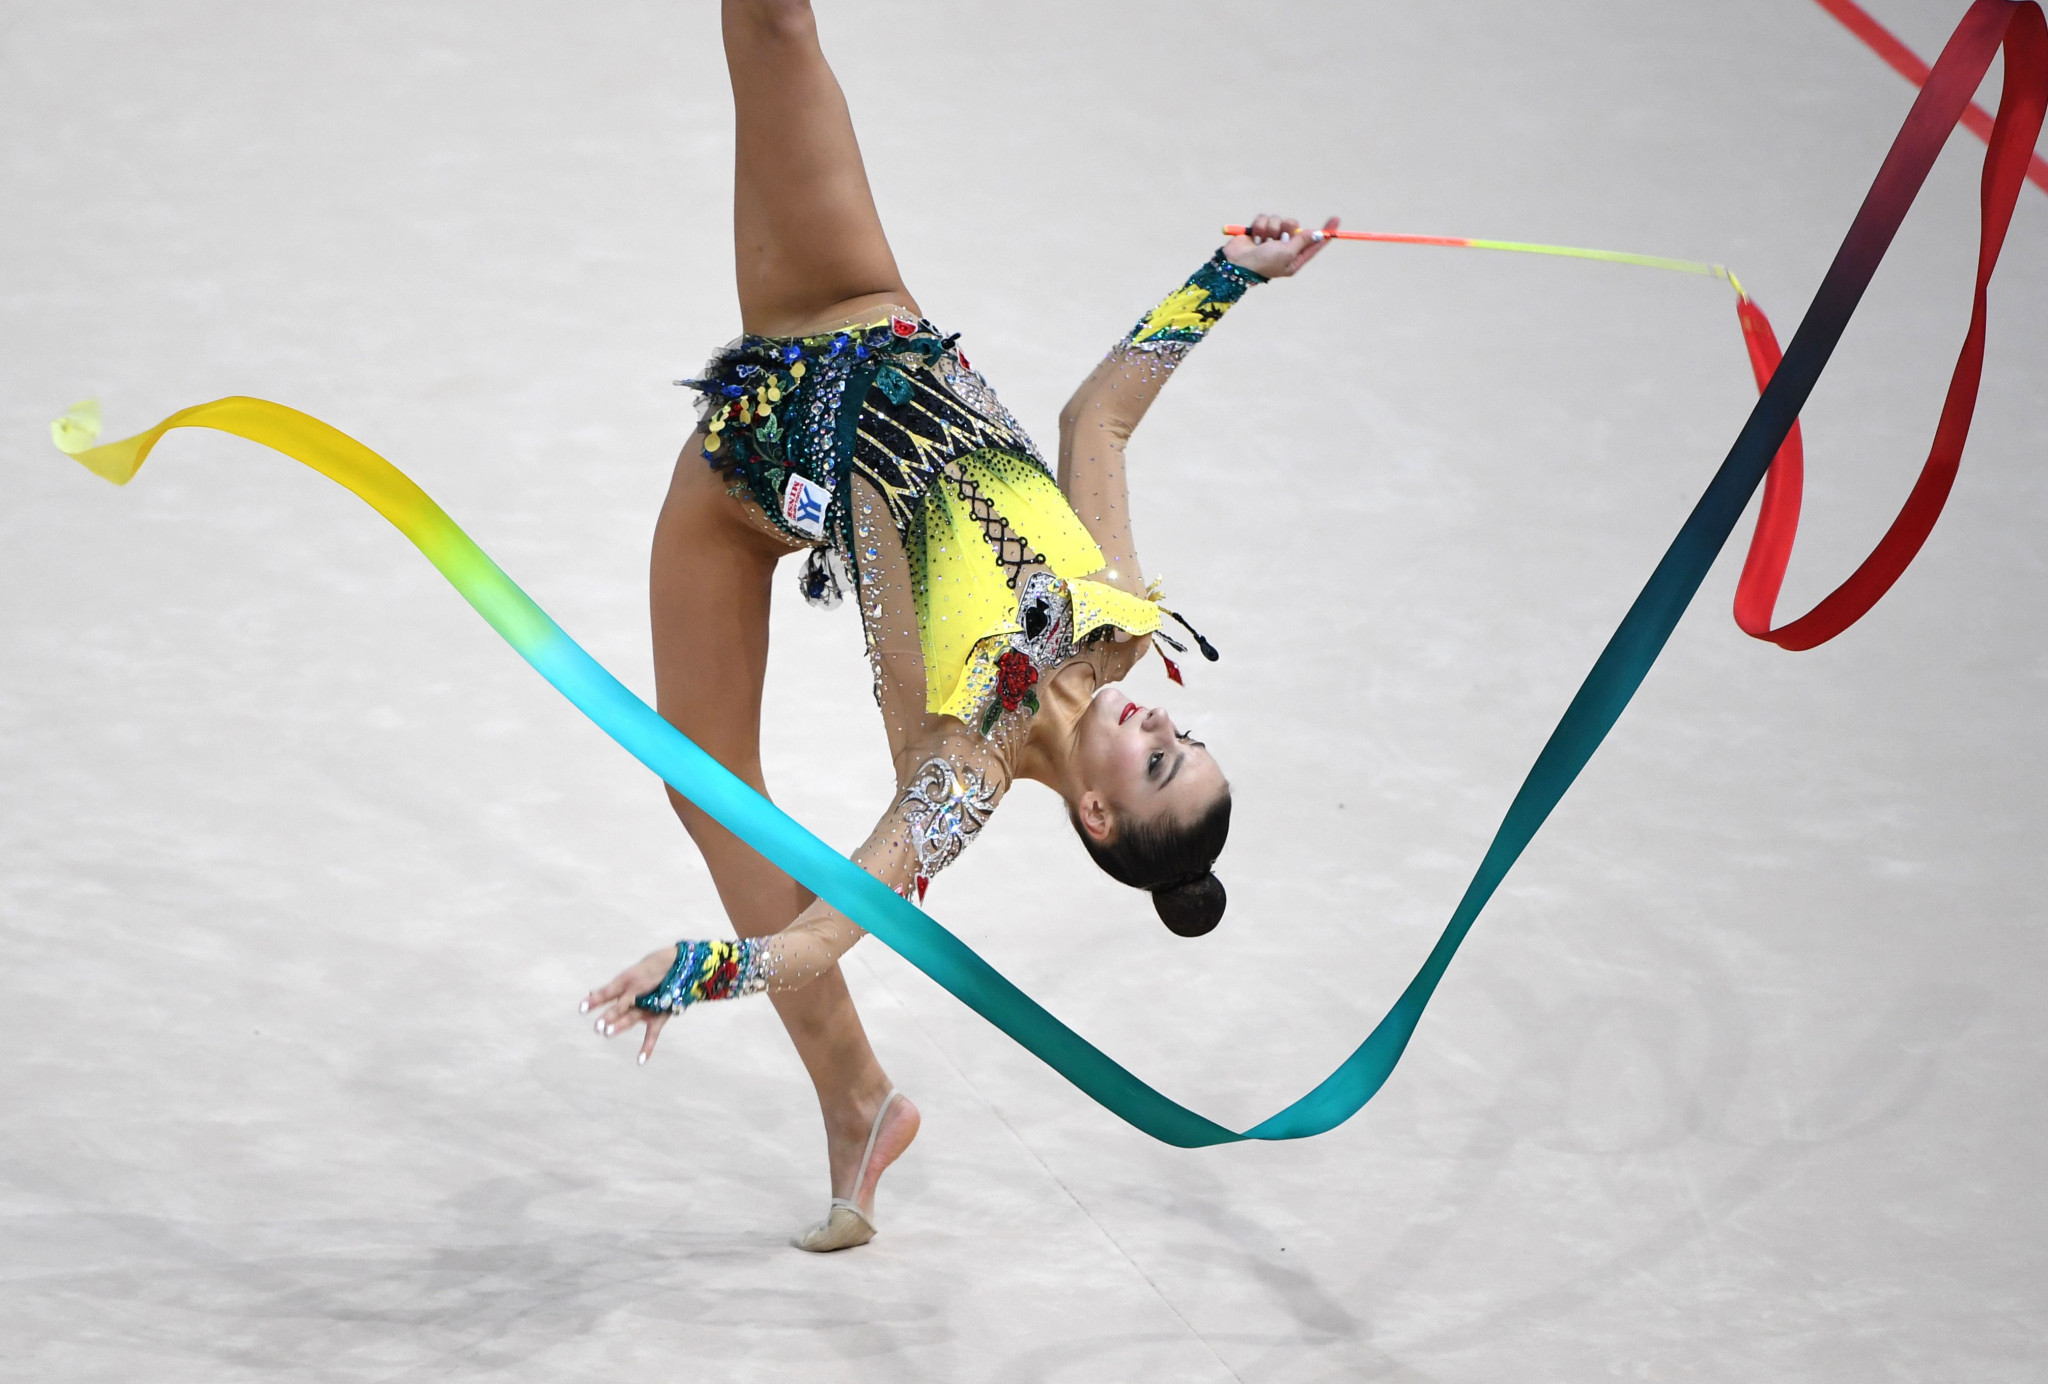 Alina Harnasko broke the Averina twin monopoly by winning the ribbon title ©Getty Images